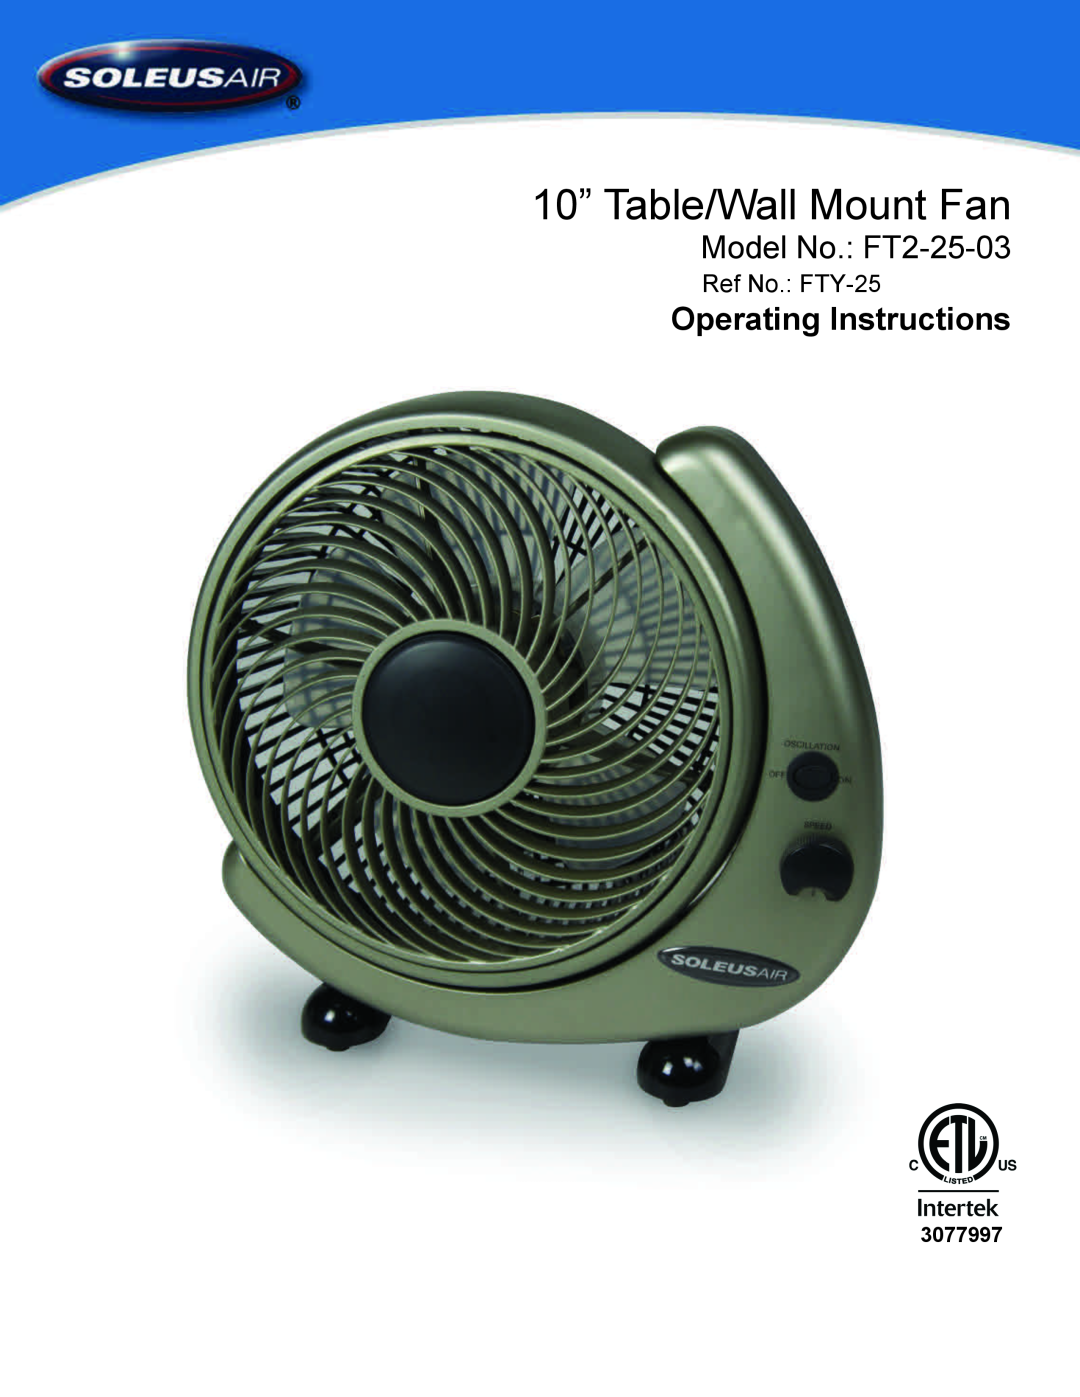 Soleus Air ft2-25-03 operating instructions 10” Table/Wall Mount Fan, Model No. FT2-25-03, Operating Instructions, 3077997 